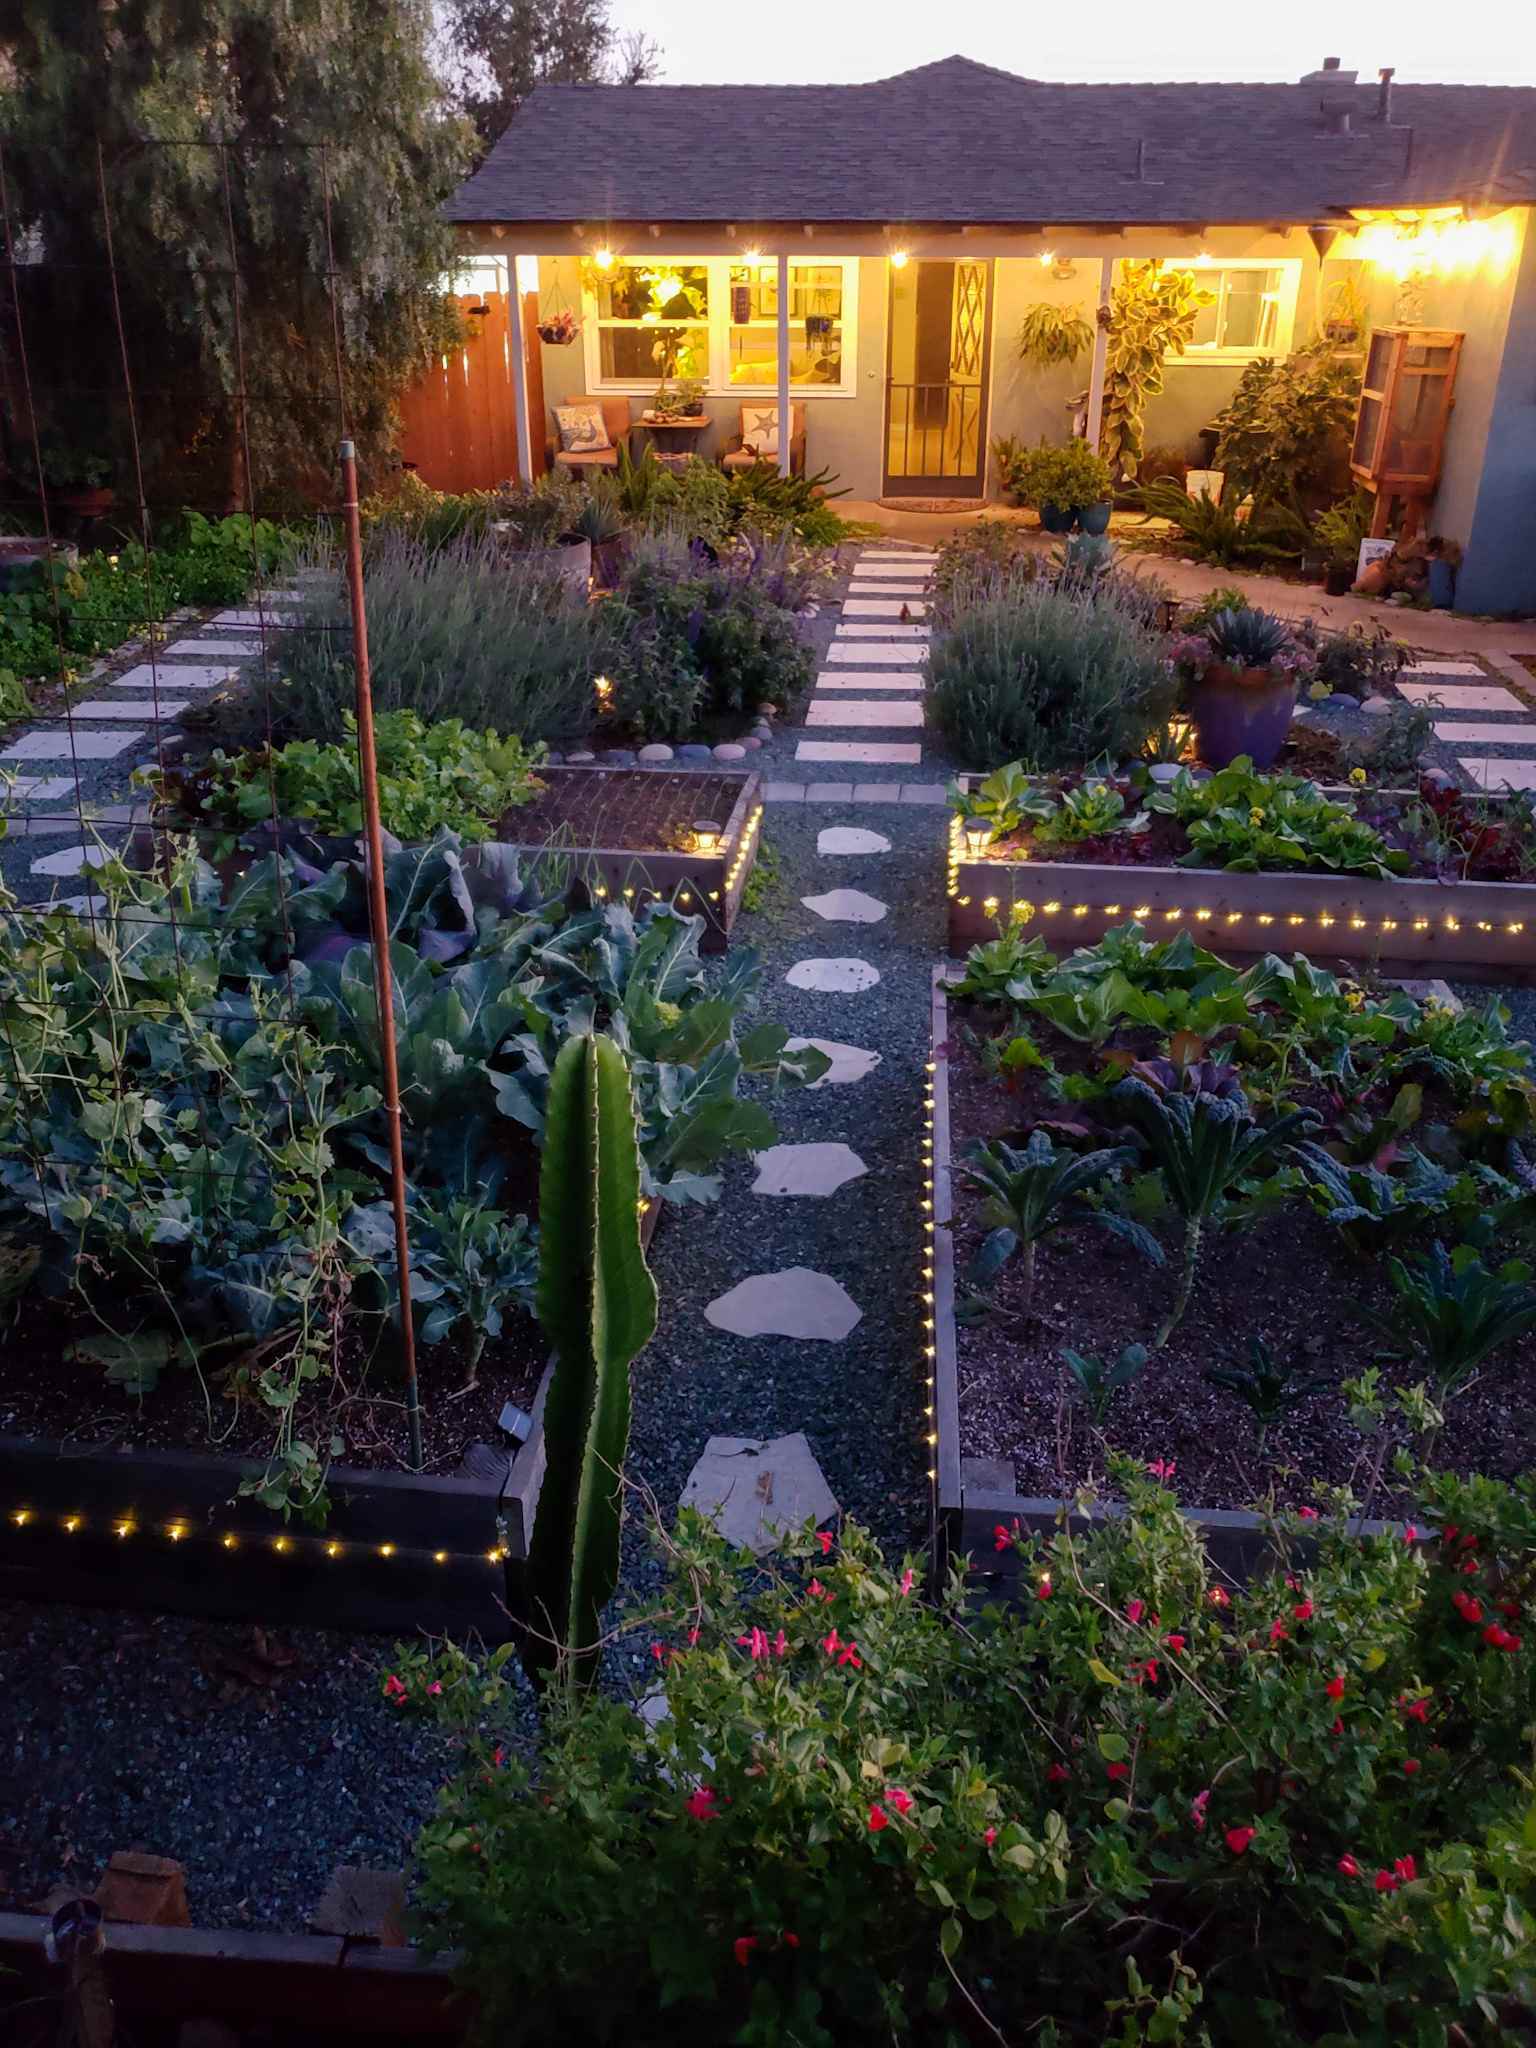 An image of the front yard garden facing the house. It is dusk and the string lights on the porch are lit. There are raised garden beds full of vegetables, islands lined with river rock that contain flowering perennial and annual plants, cacti, shrubs, trees, and vines. The pathways are landscaped with gravel and walkways lined with pavers and stone. 